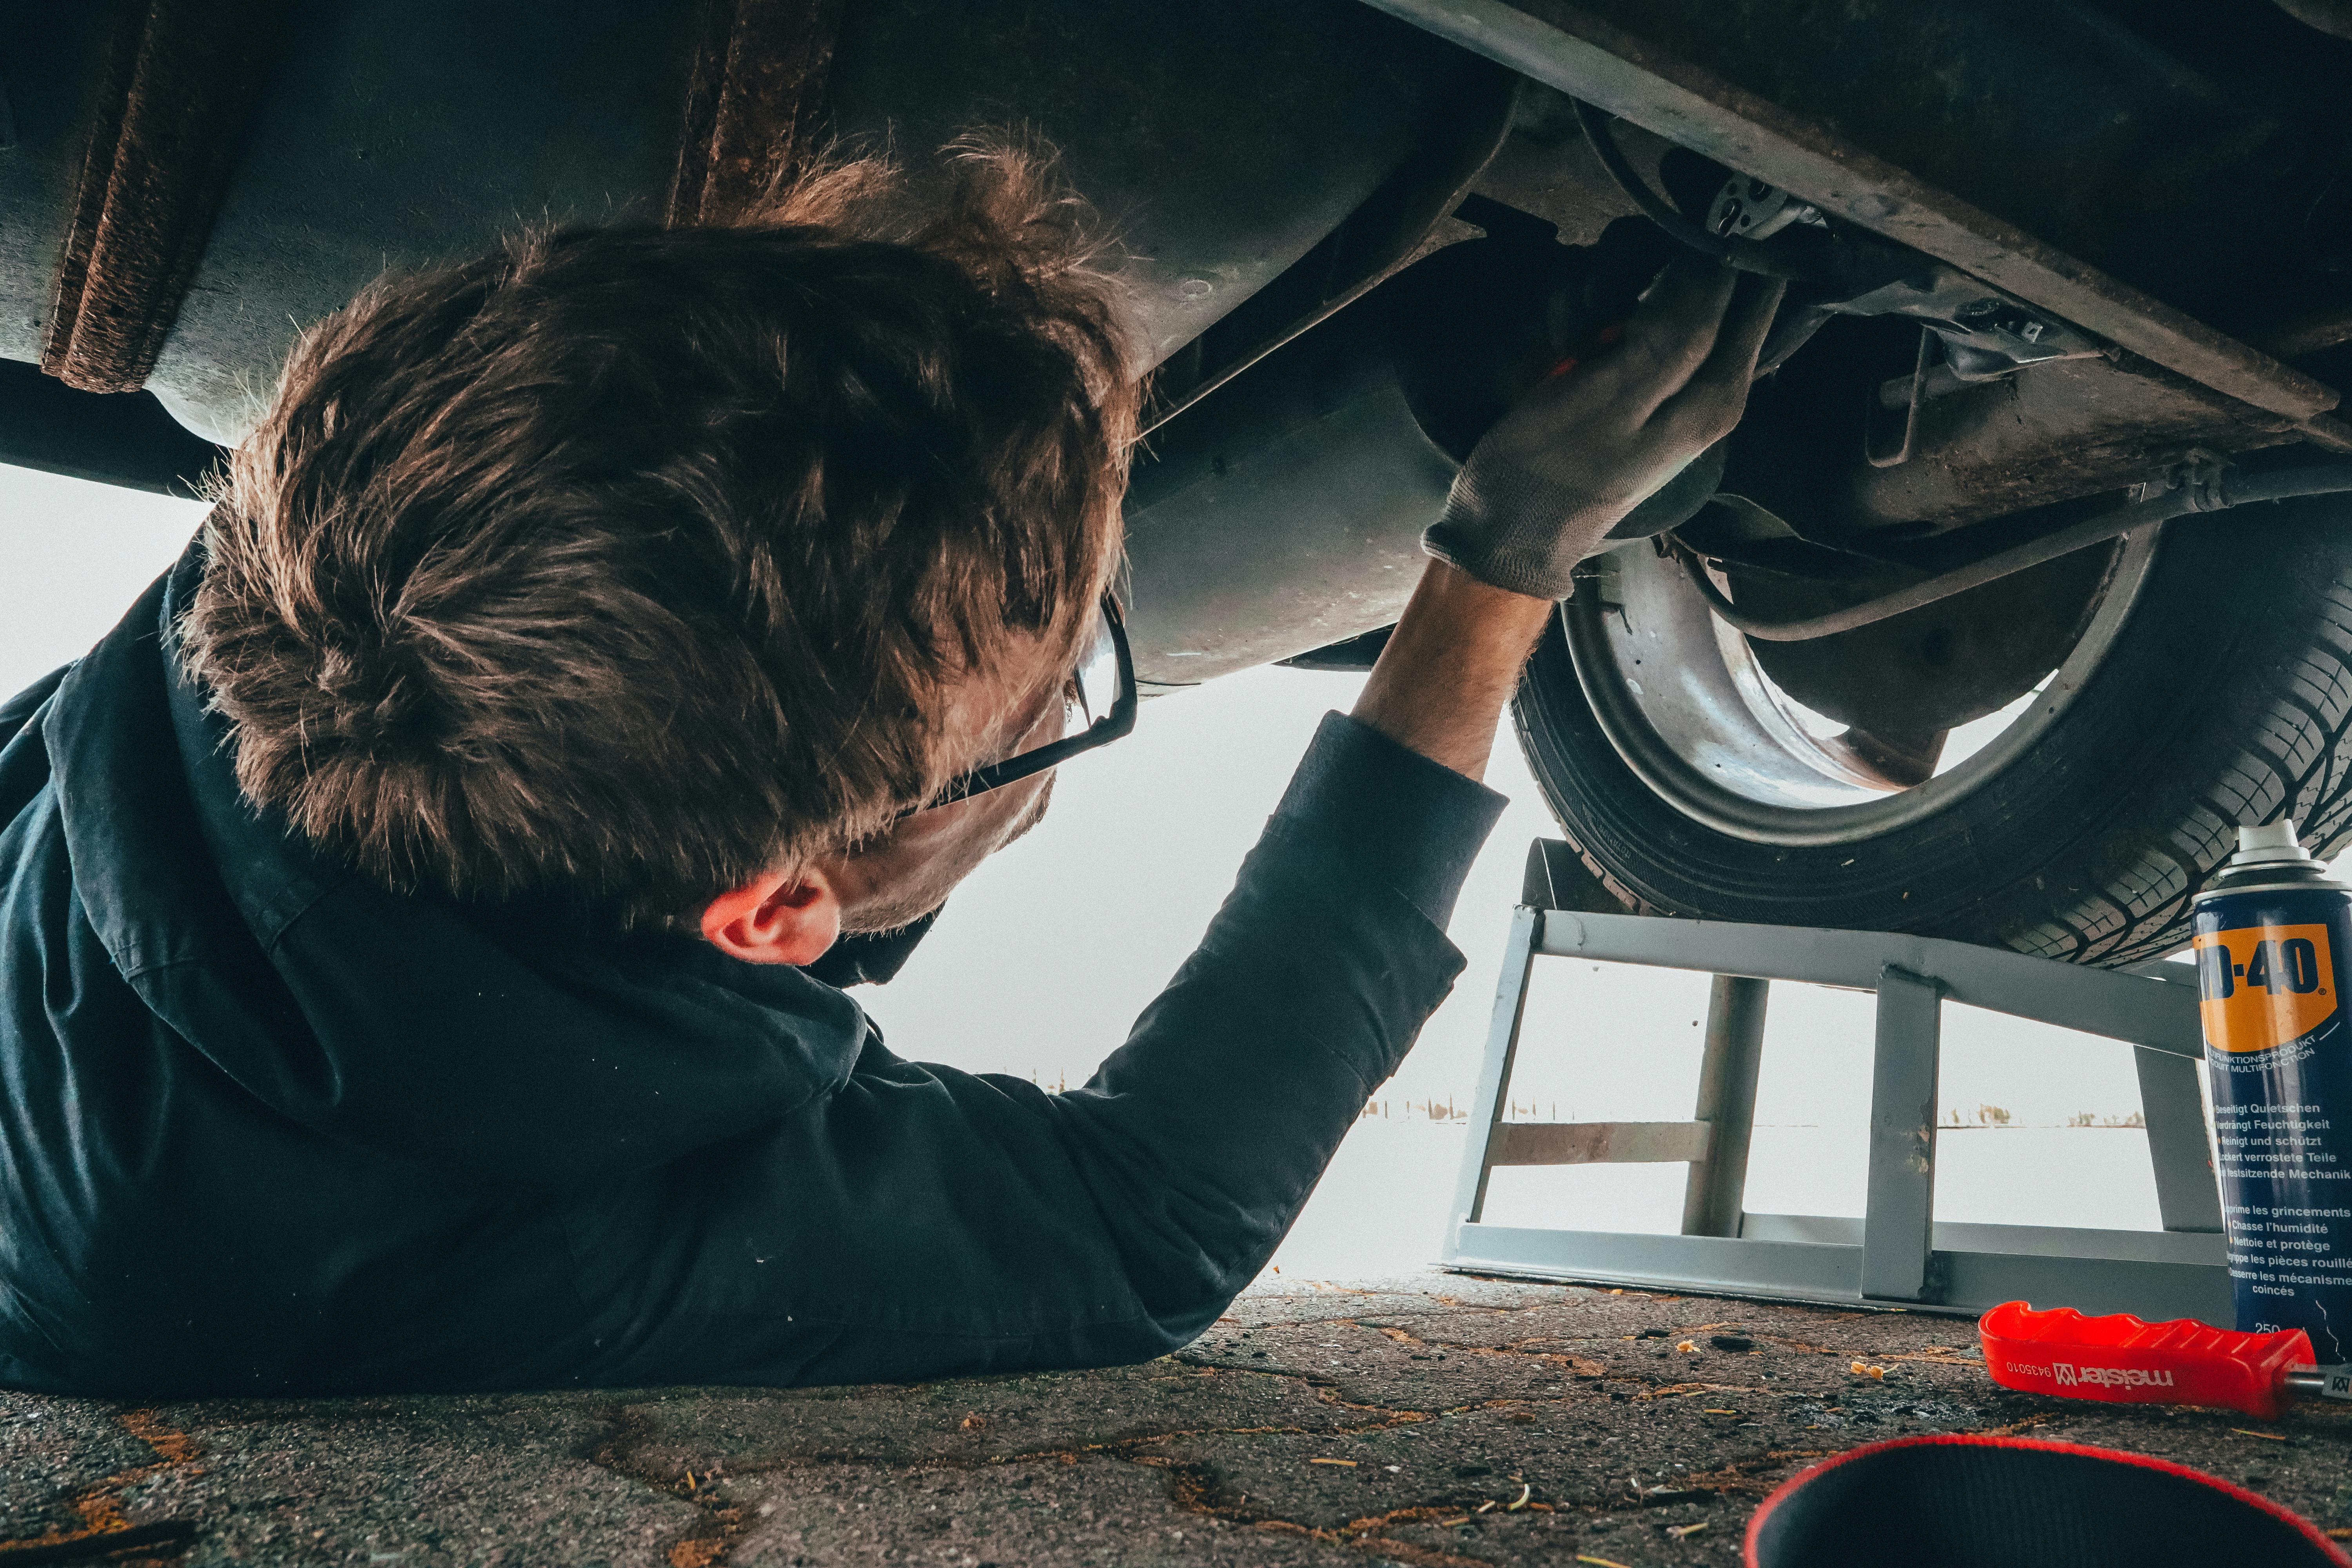 A image of a man looking underneath a car